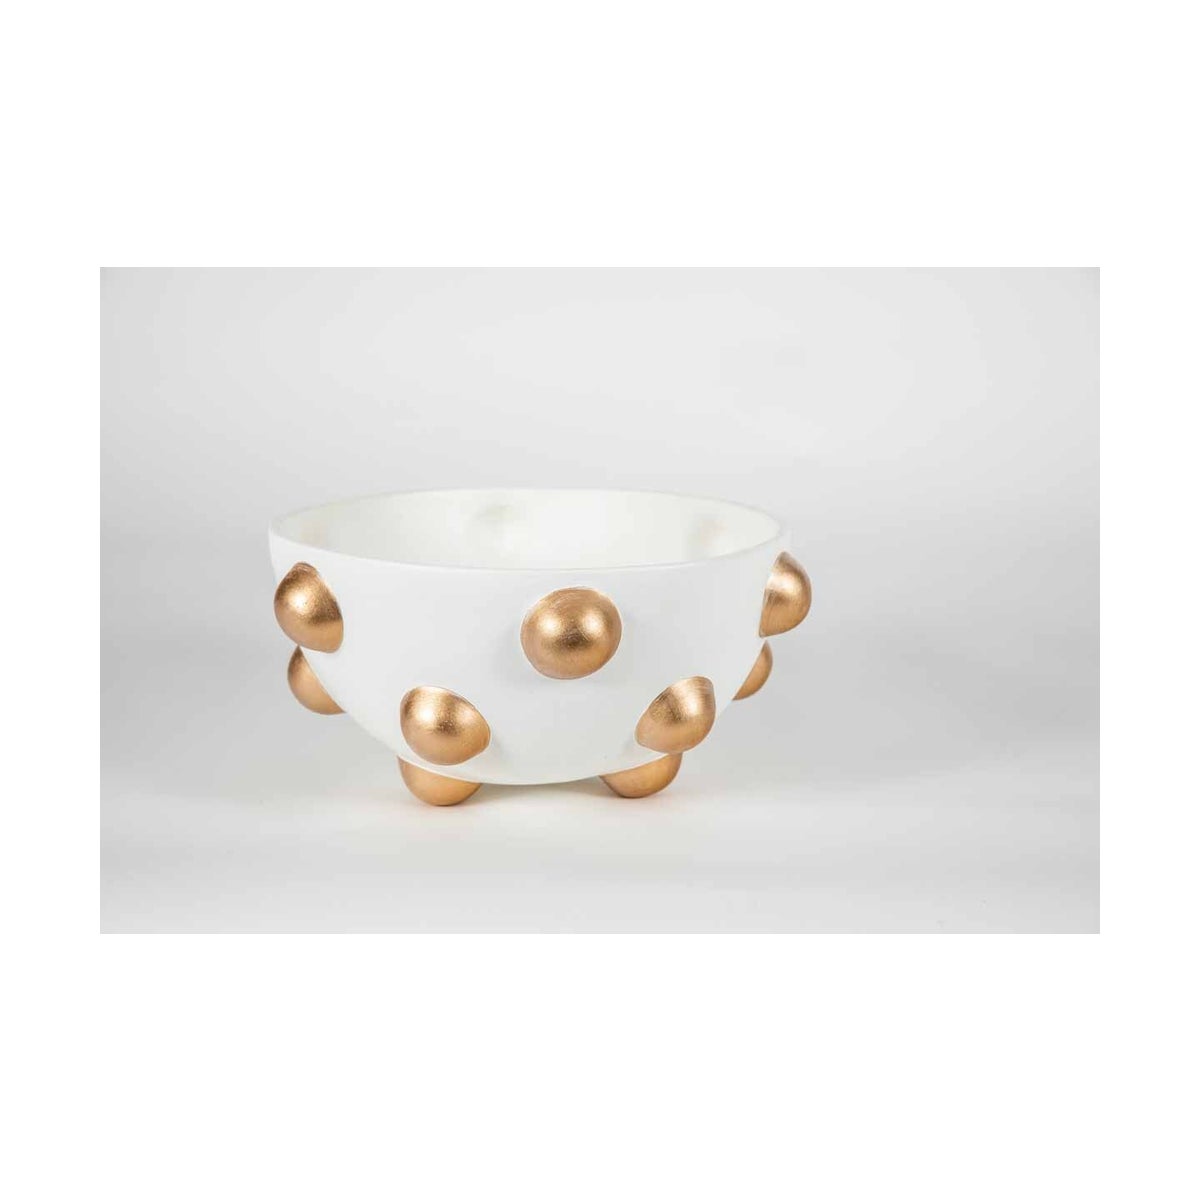 Bowl in Bianca w/ Gold Dots